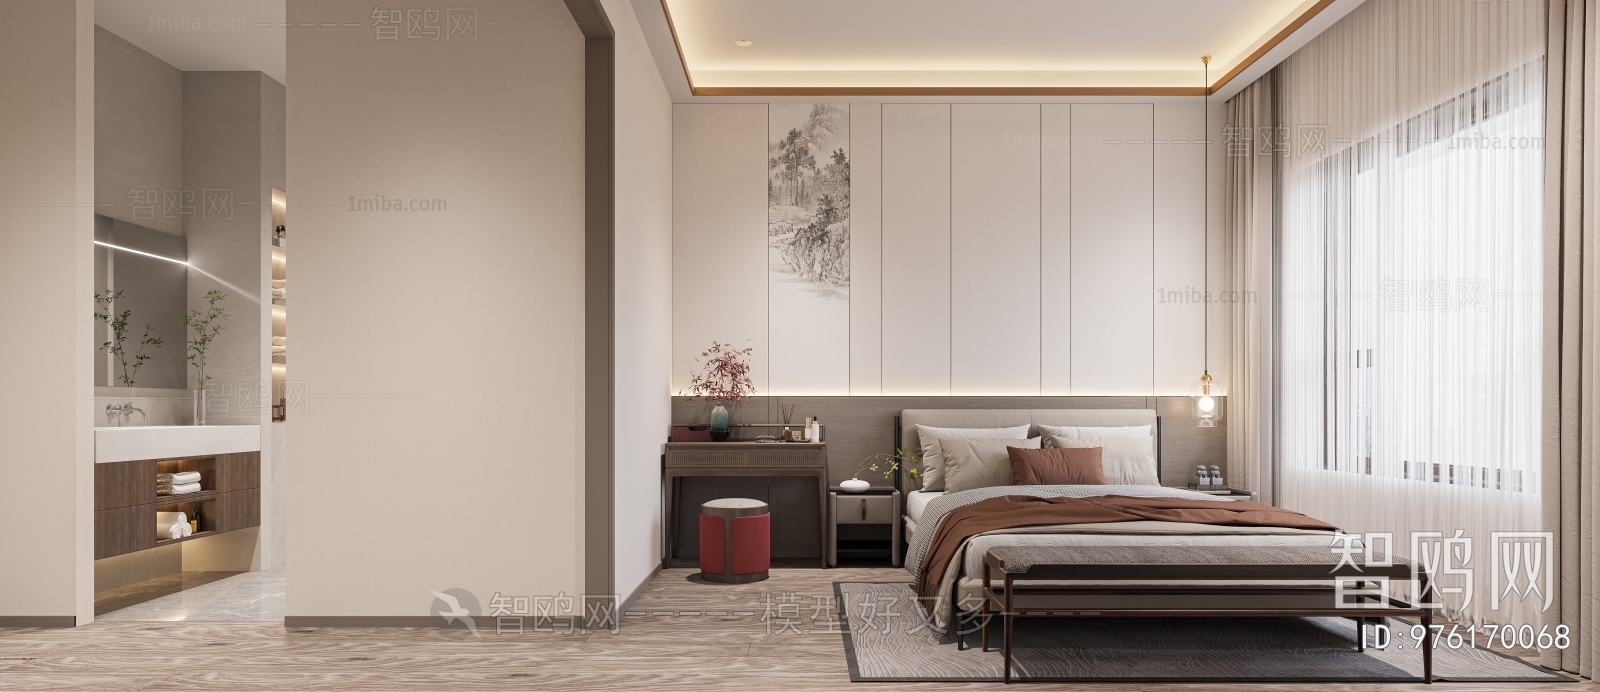 Modern New Chinese Style Bedroom